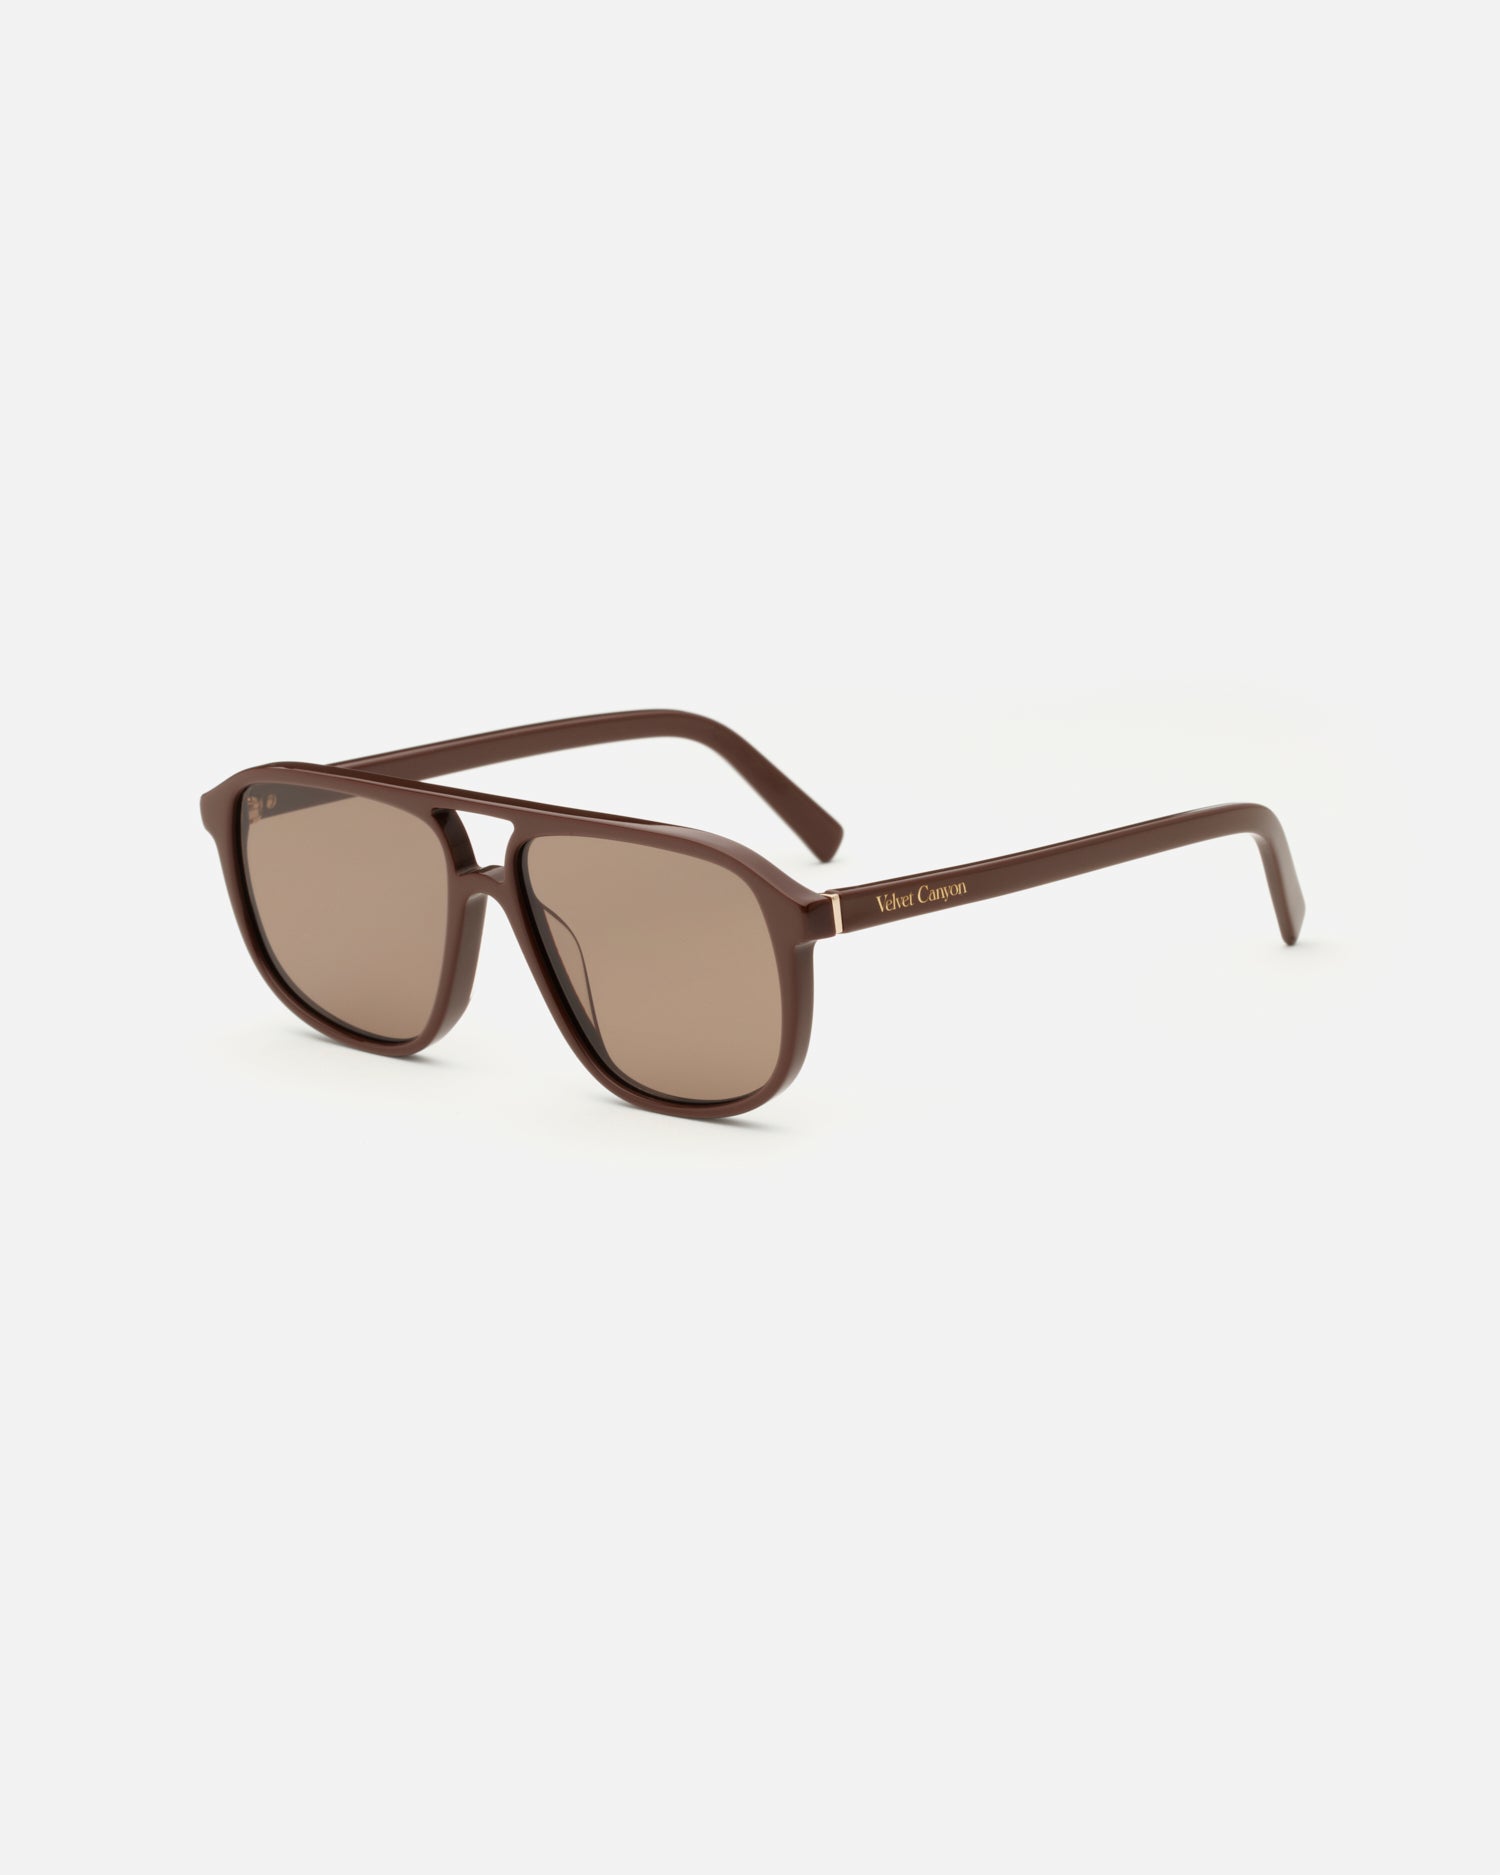 La Touriste luxe sunglasses by Velvet Canyon in Cacao